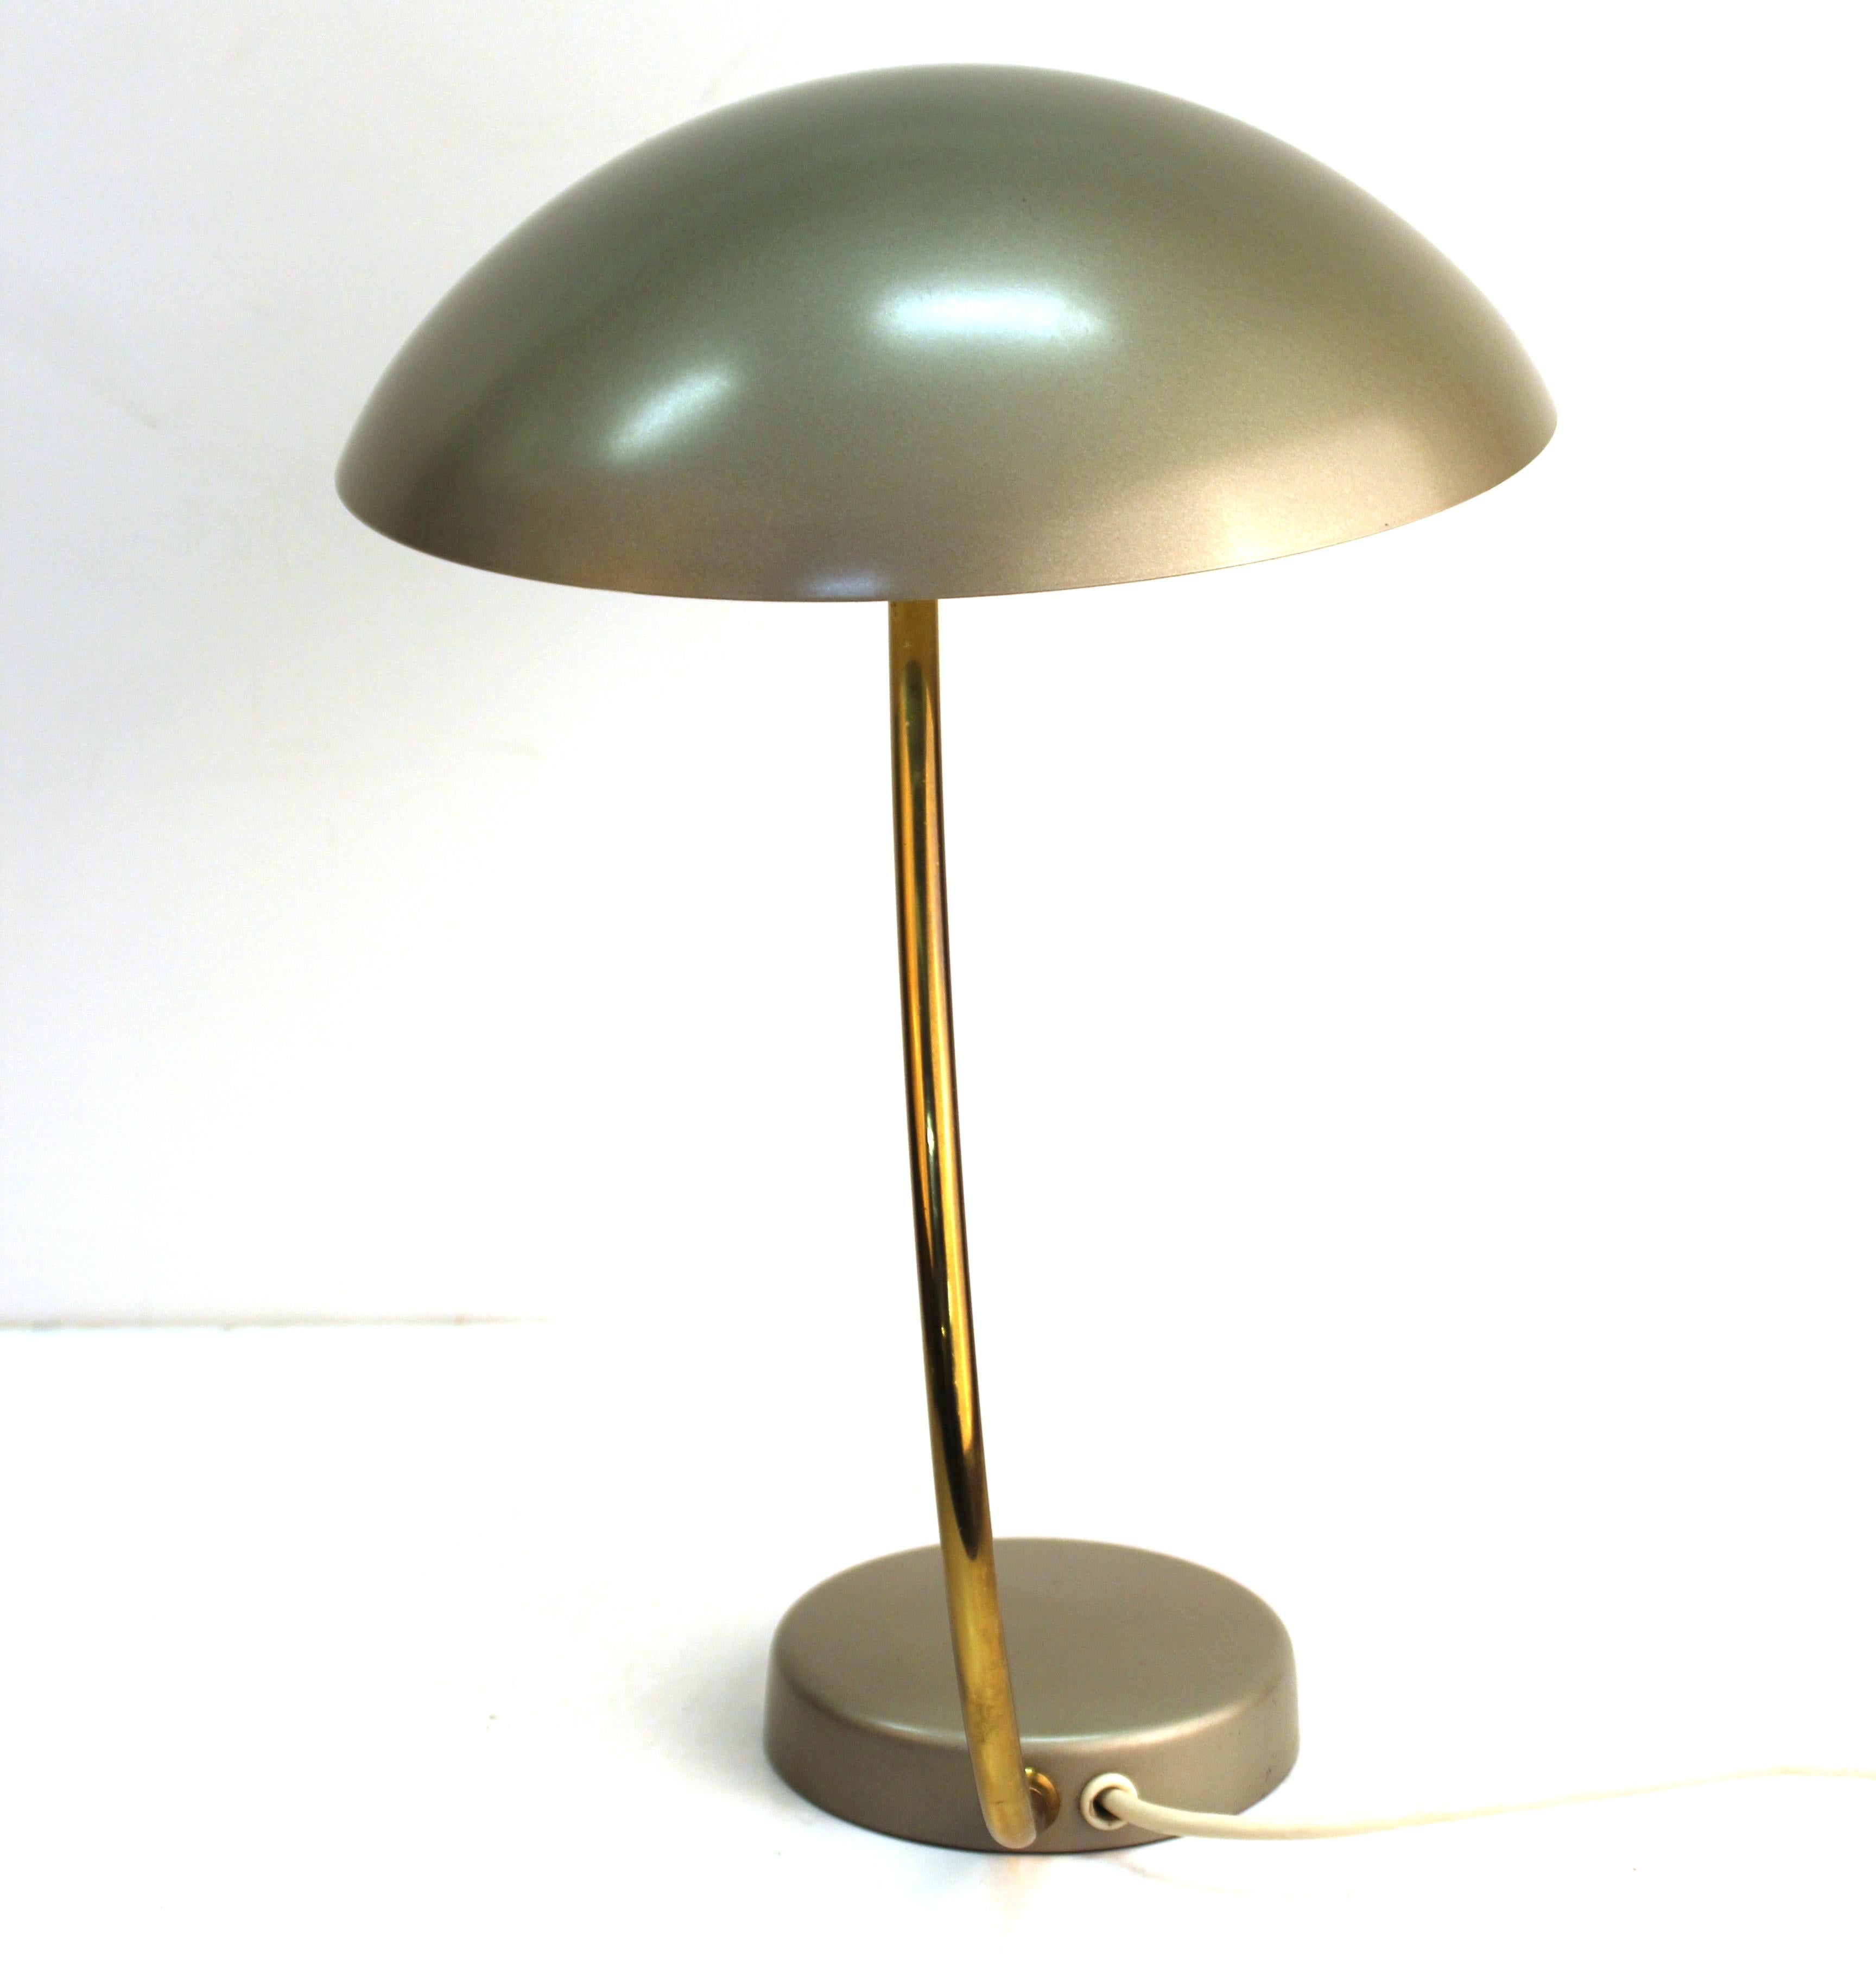 Mid-Century Modern metal saucer desk lamp with brass stem. The piece was likely made in Germany during the mid-20th century and is in great vintage condition with age-appropriate wear.